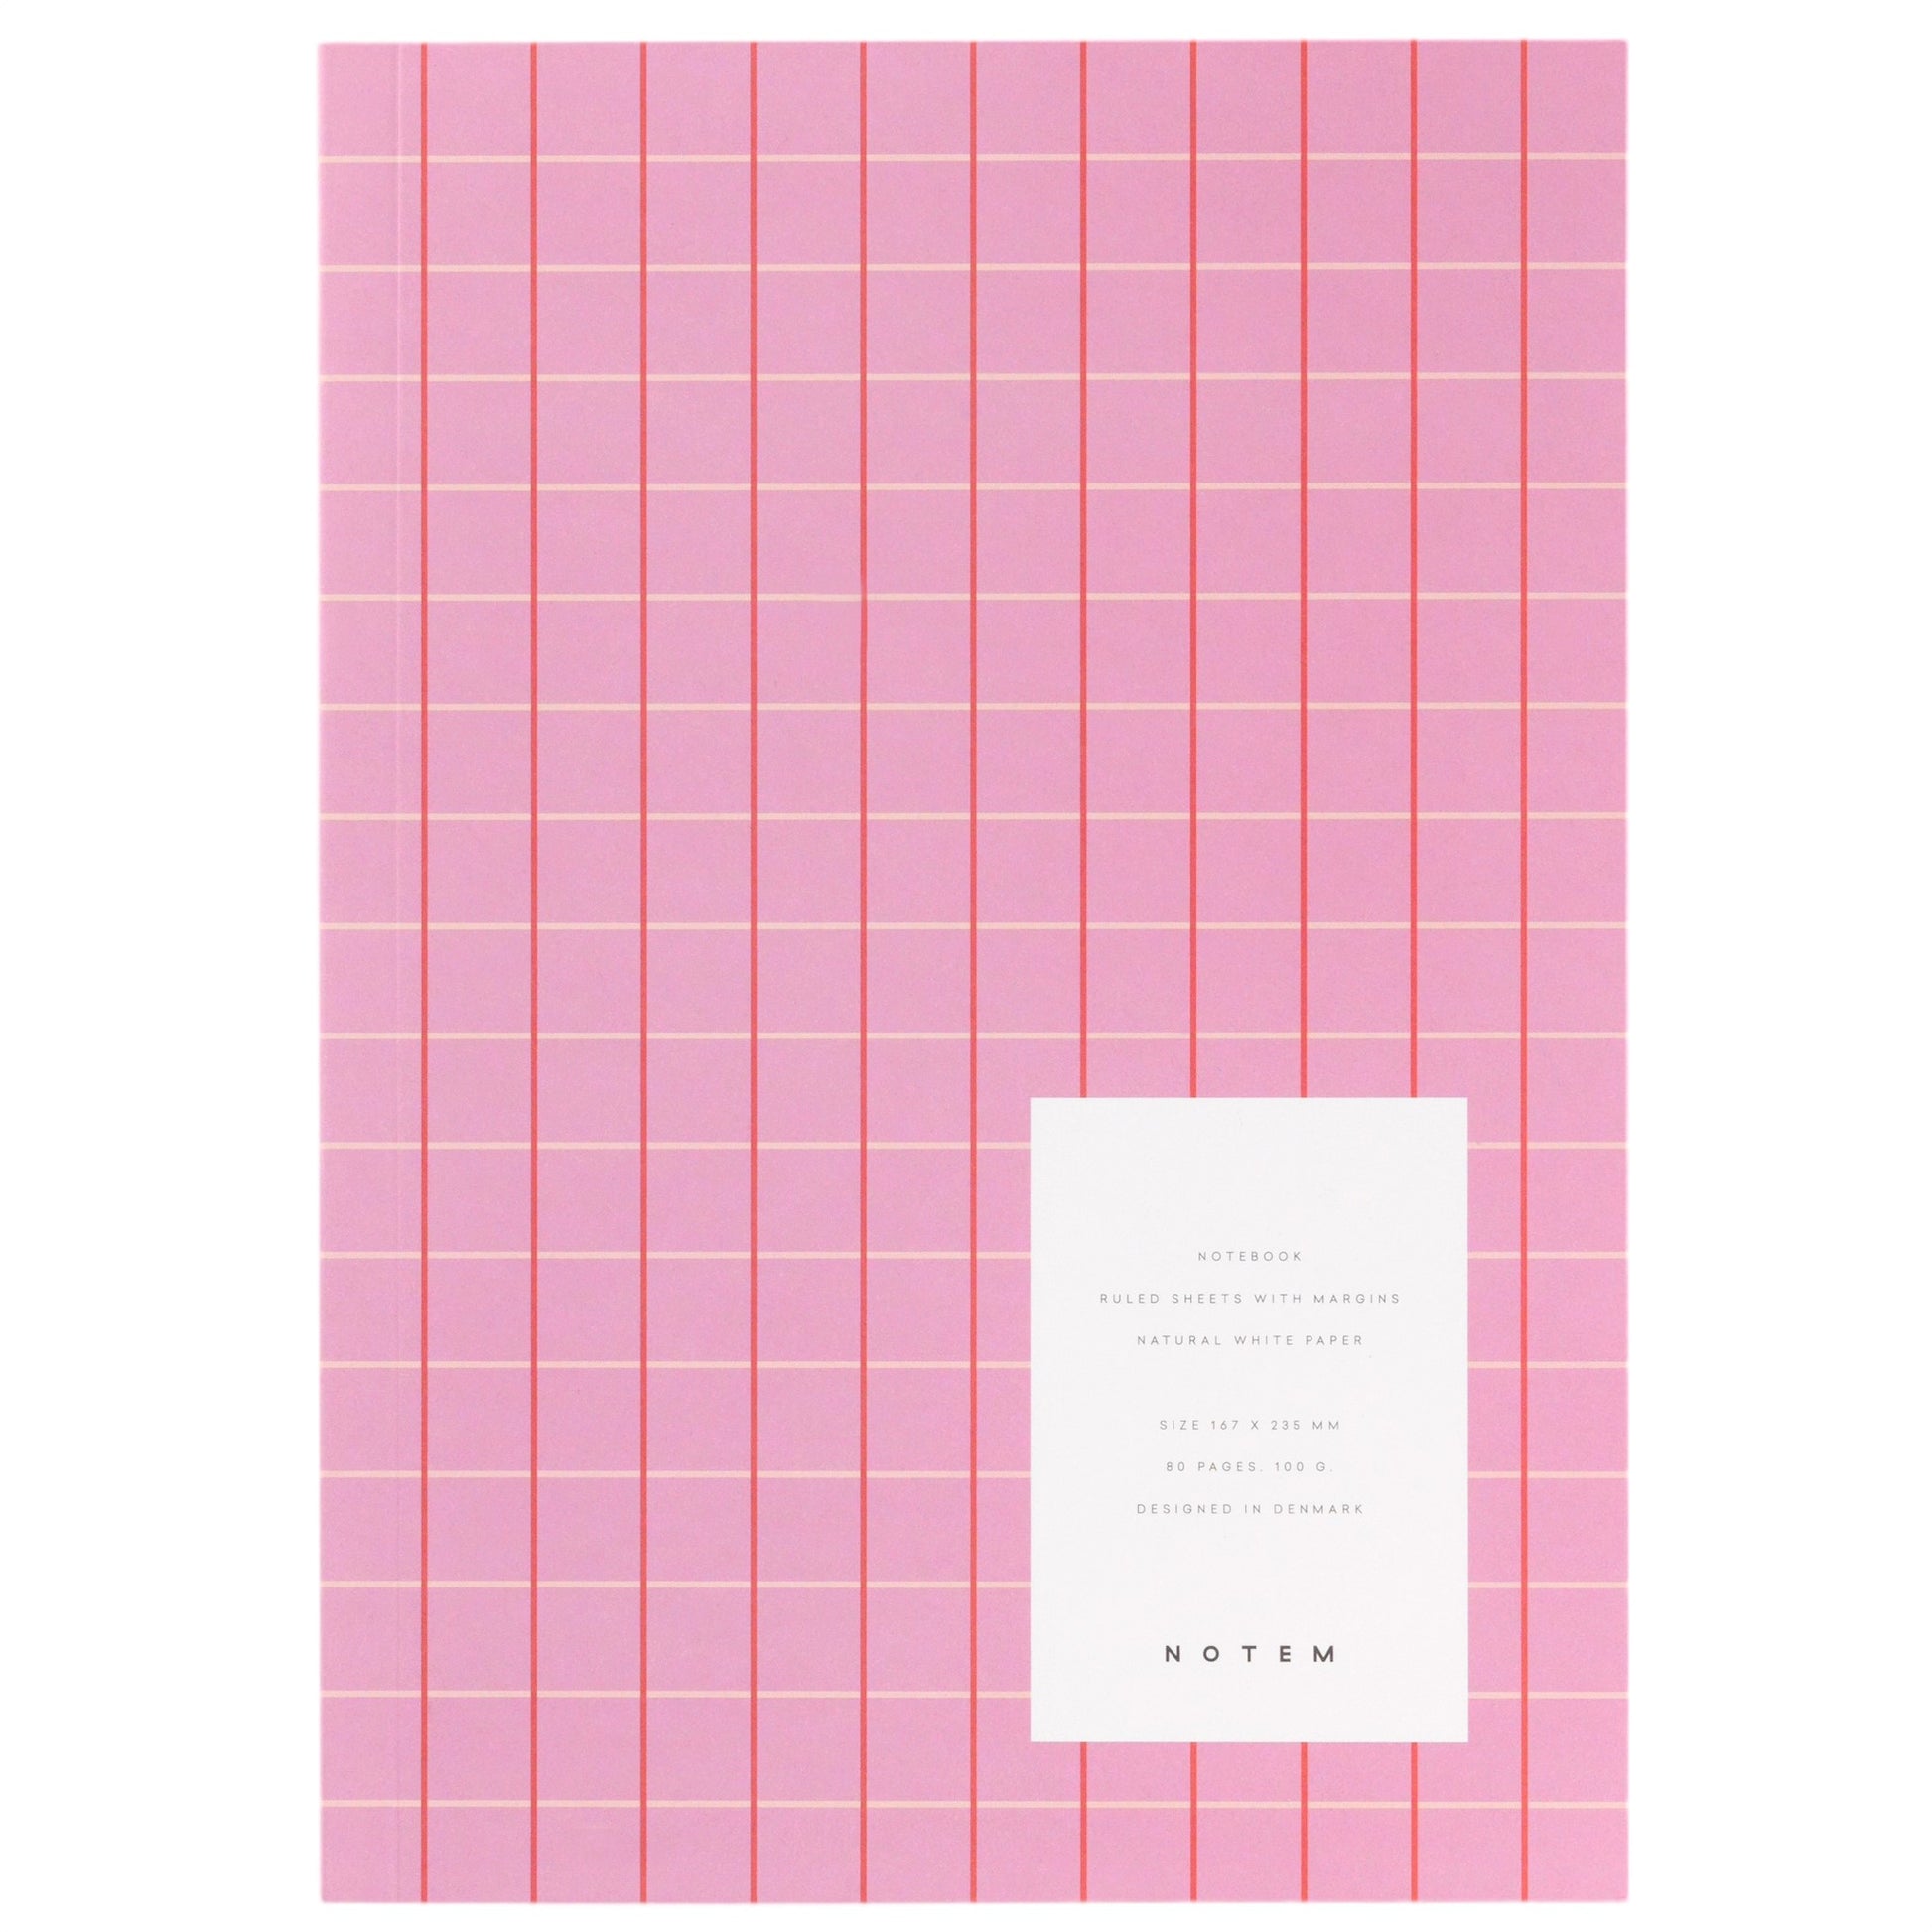 Notebook with a pink grid softcover. Lined inner pages